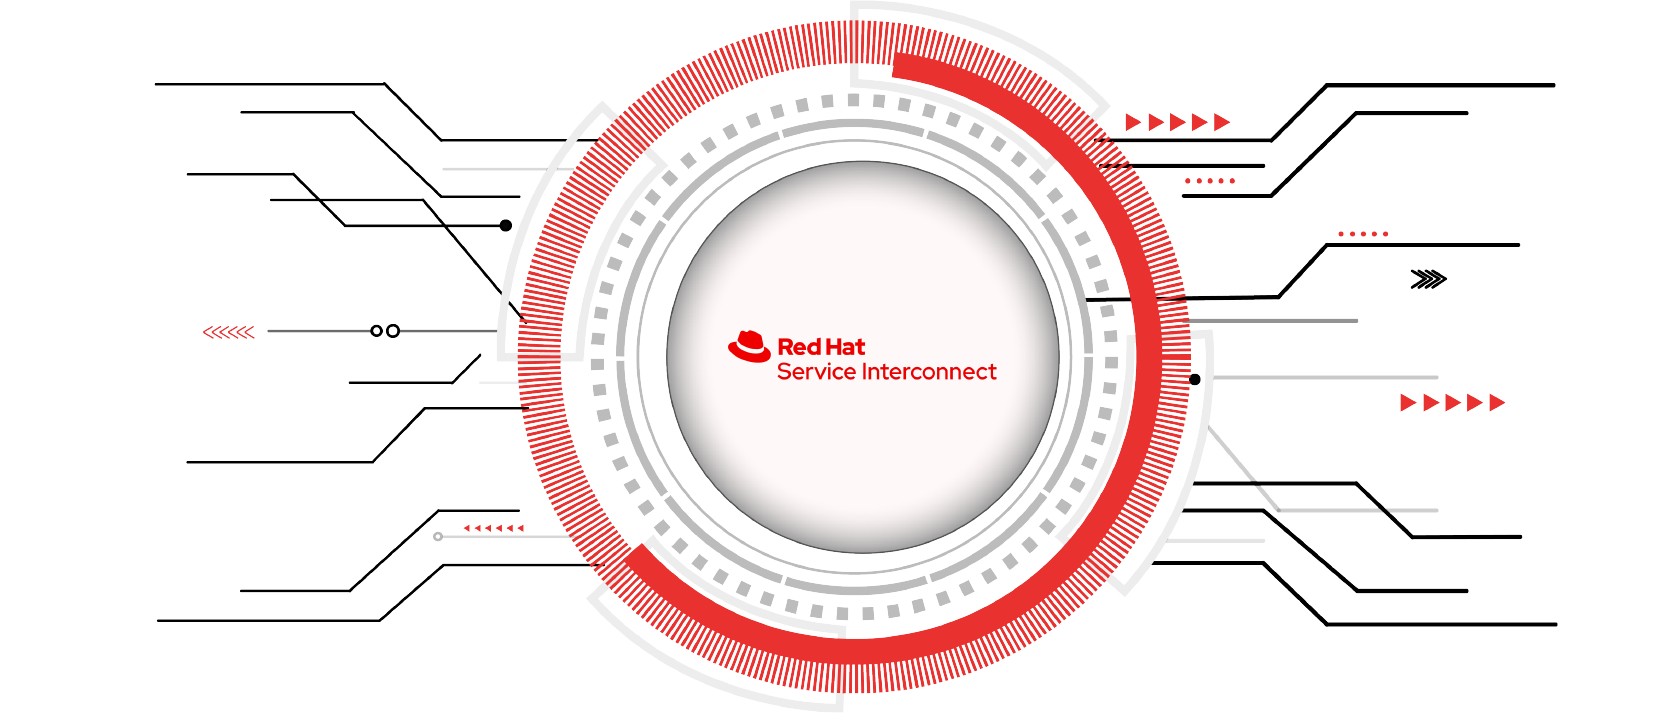 Red Hat Service Interconnect